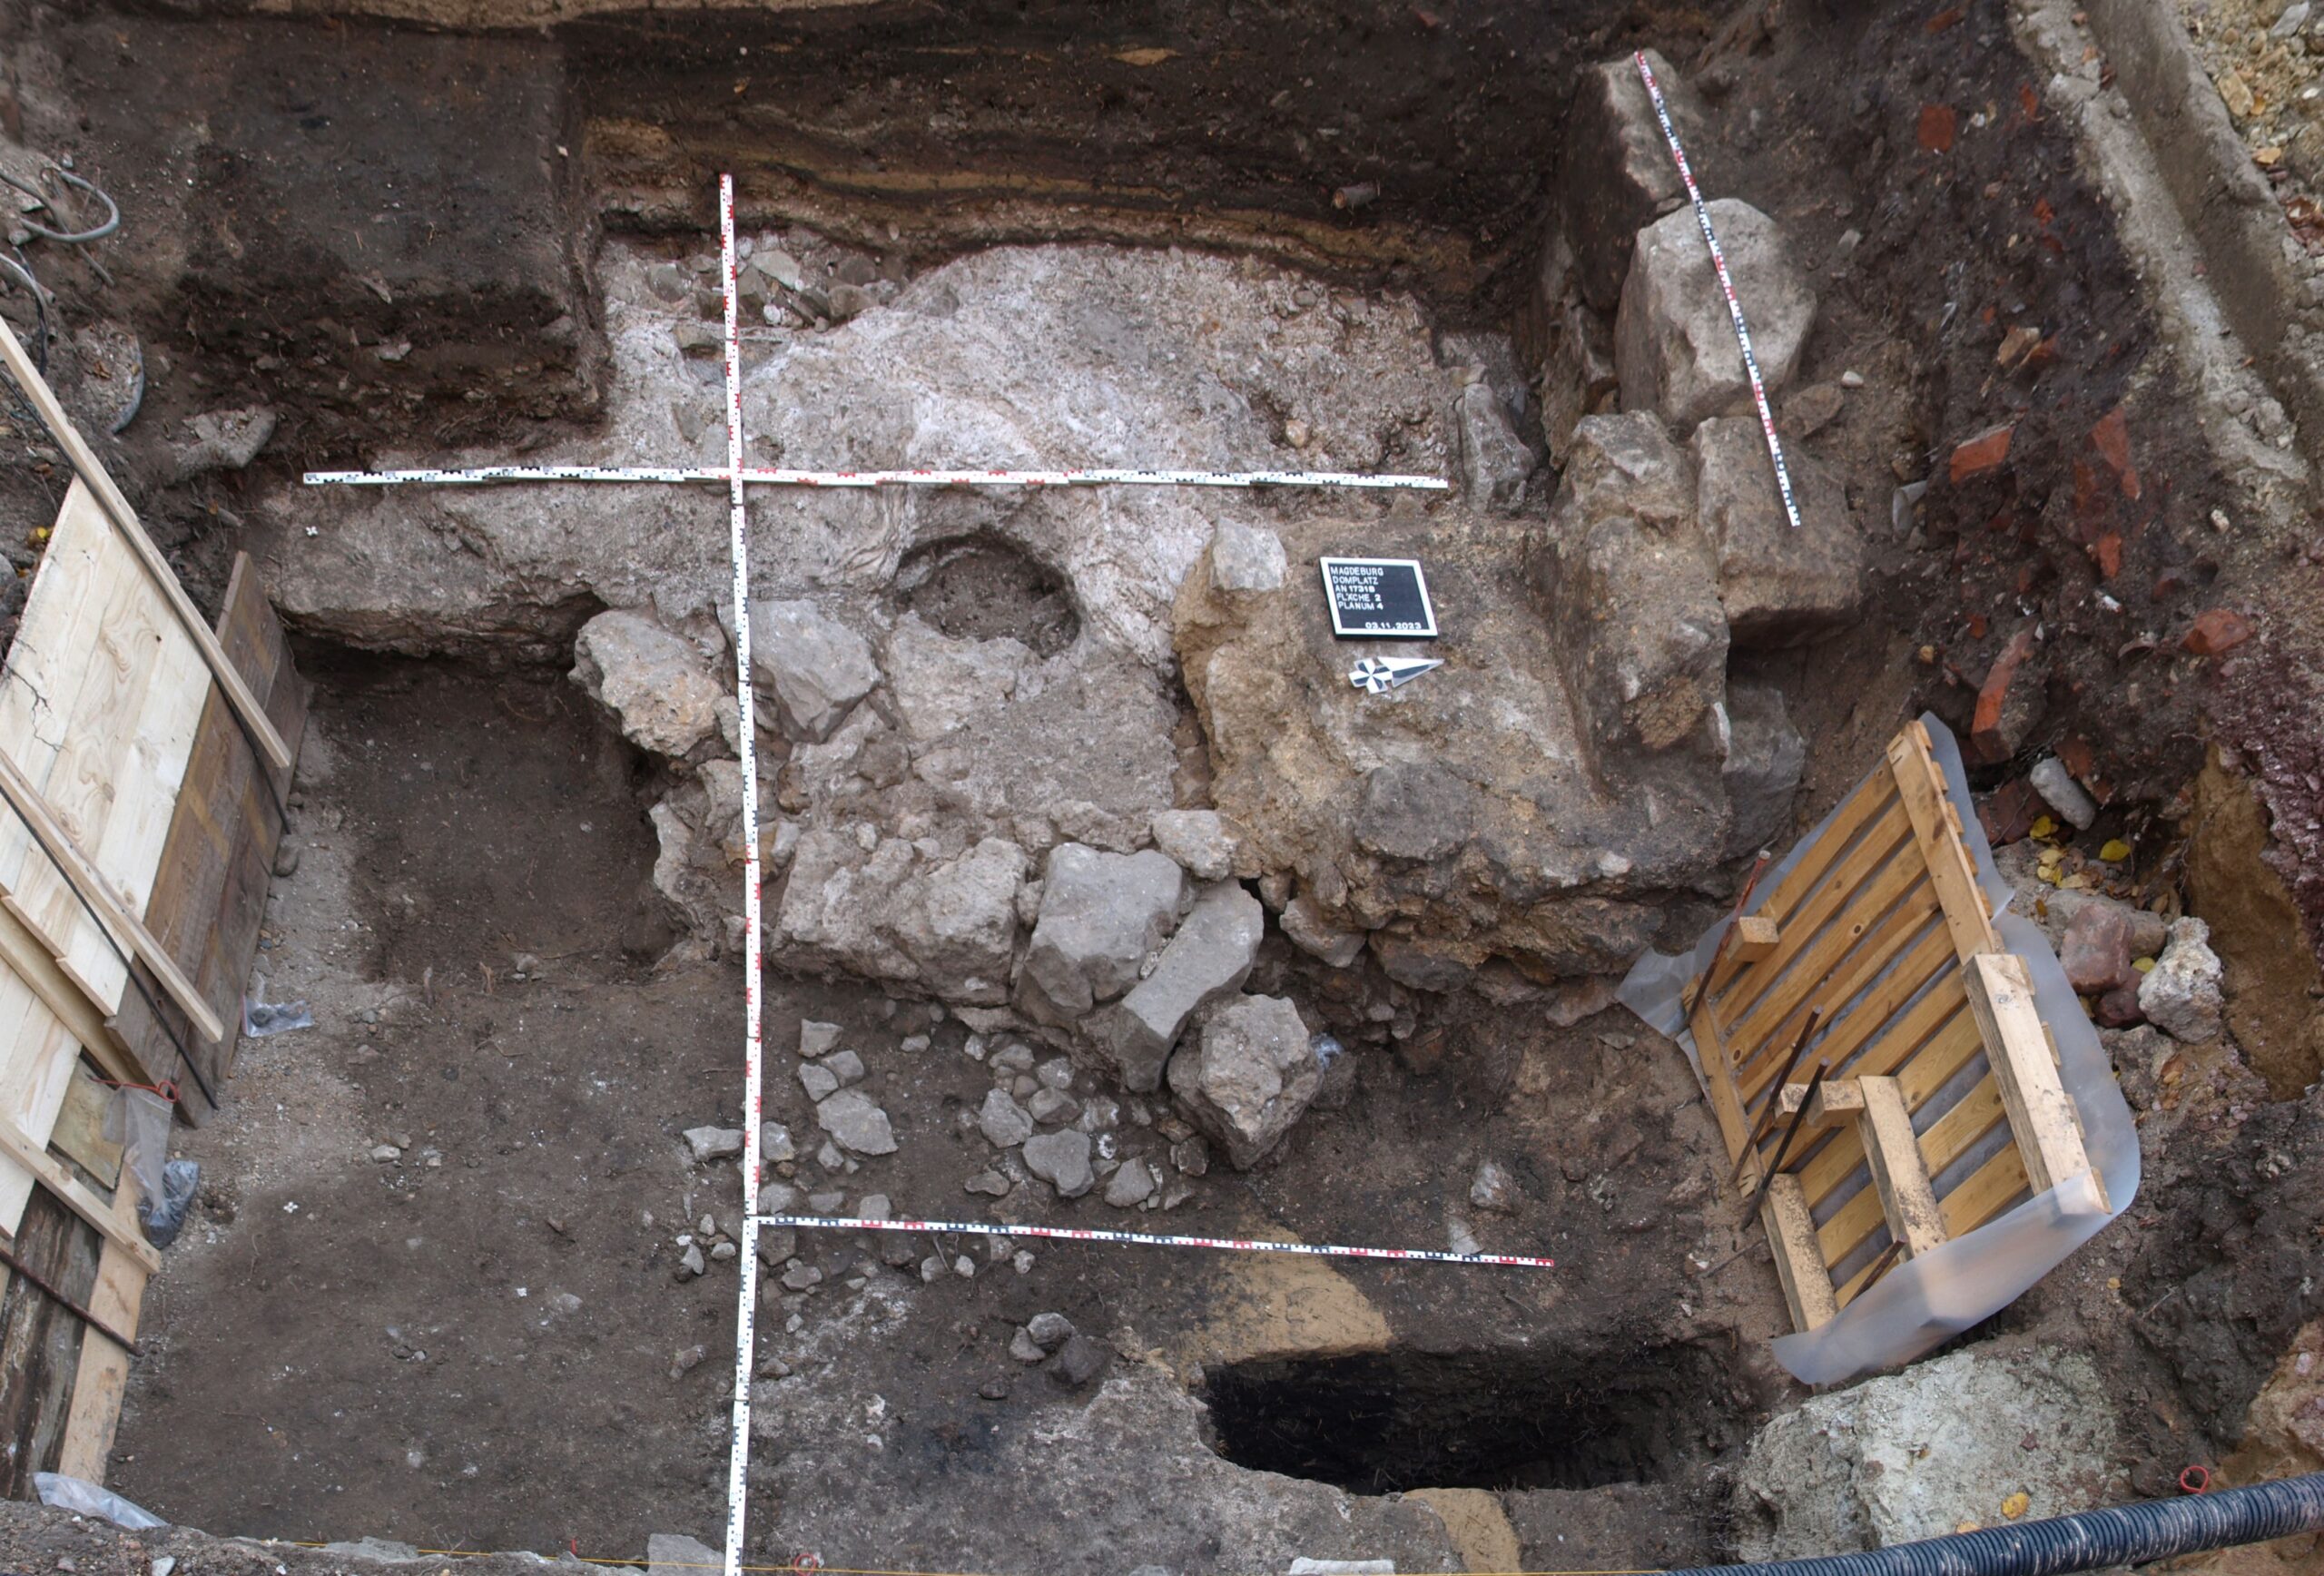 Medieval building discovered by archaeologists in Germany